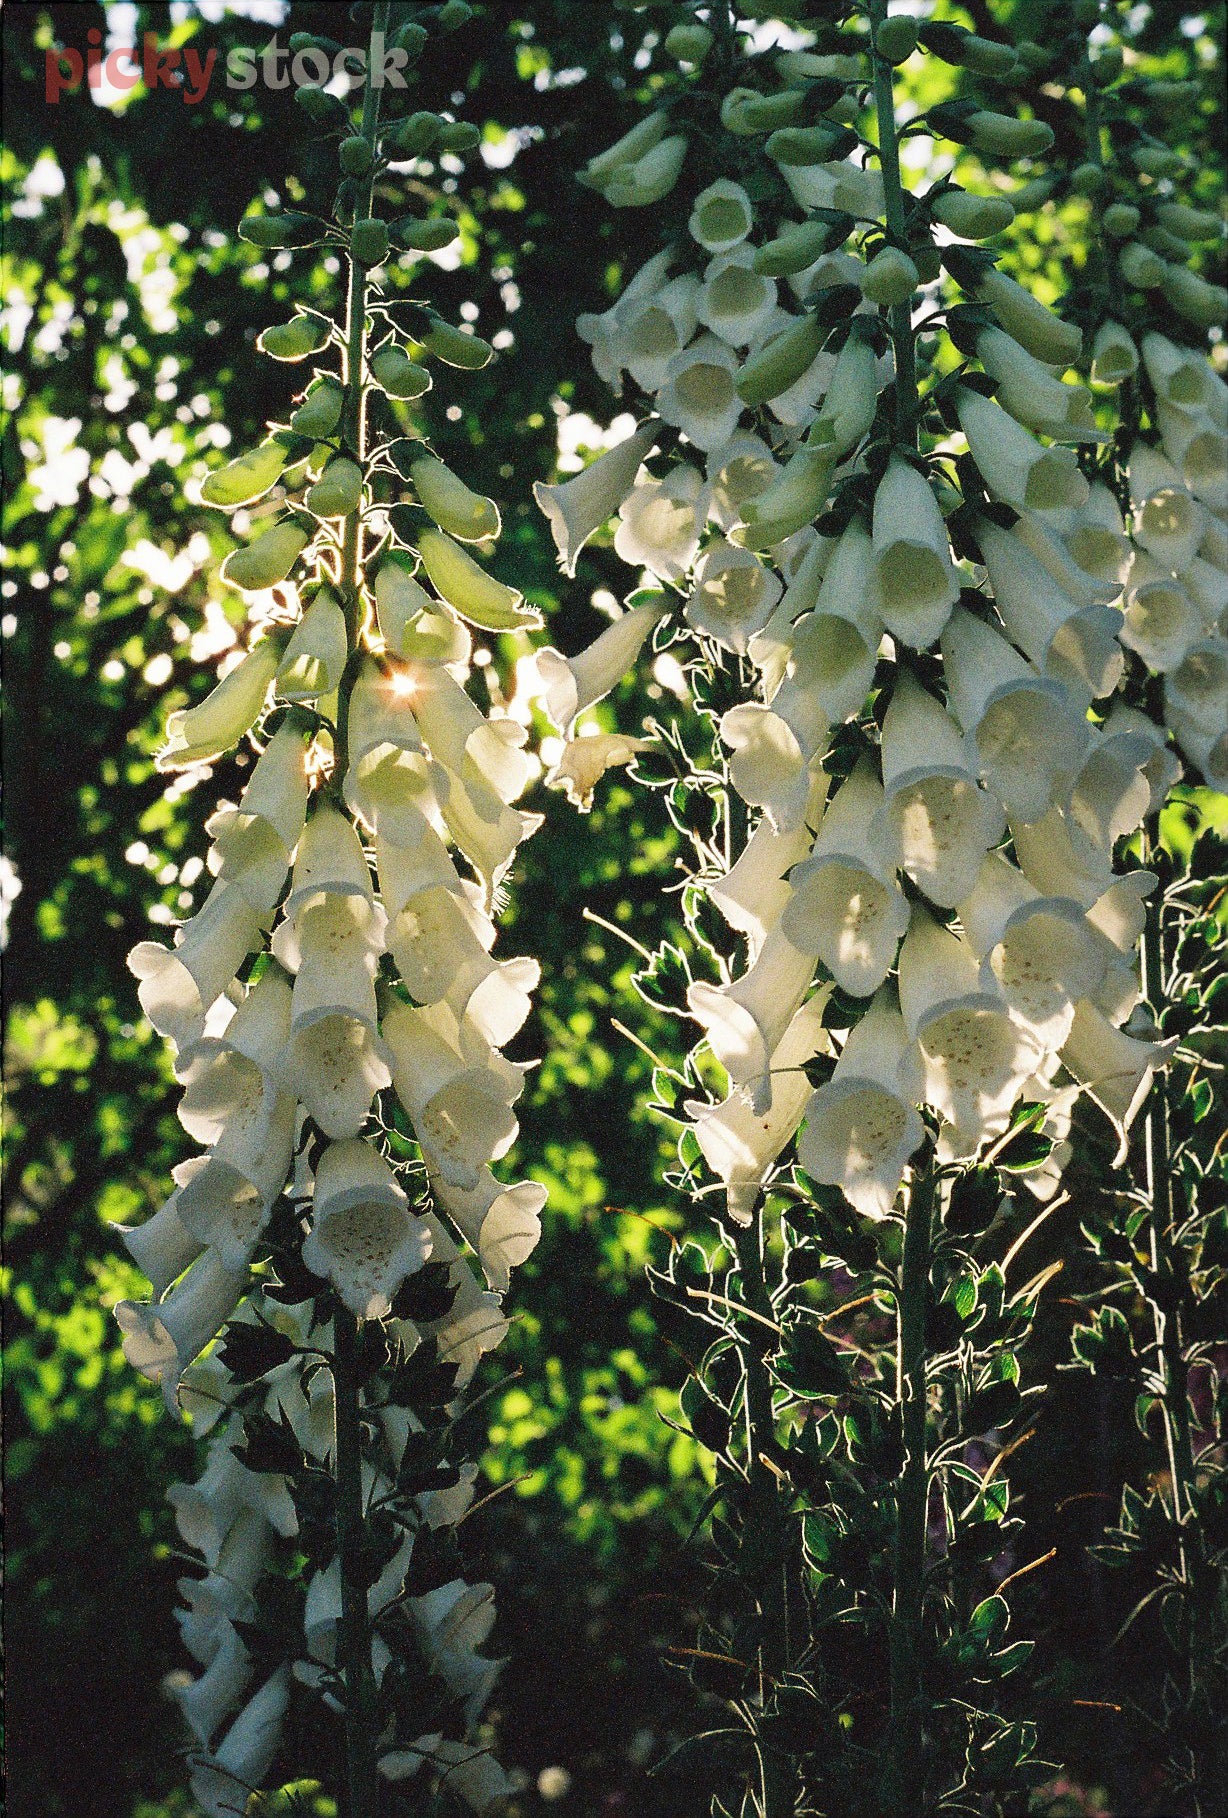 White lupin flowers dangle from the top of a vine. They sit in shadow, with the sun peeking through from behind them, illuminating some of the flowers. 